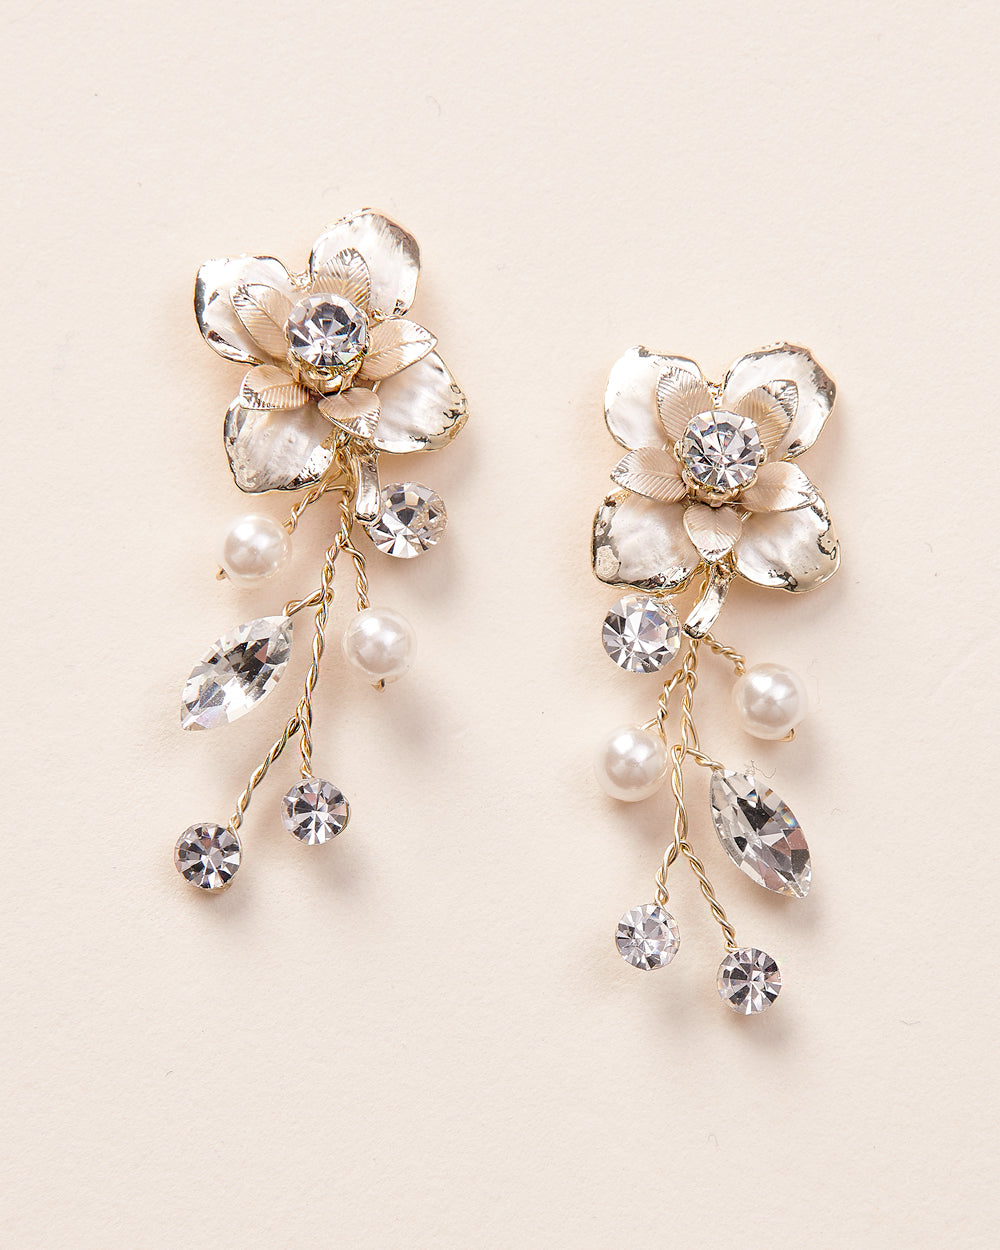 Gold Floral Earrings